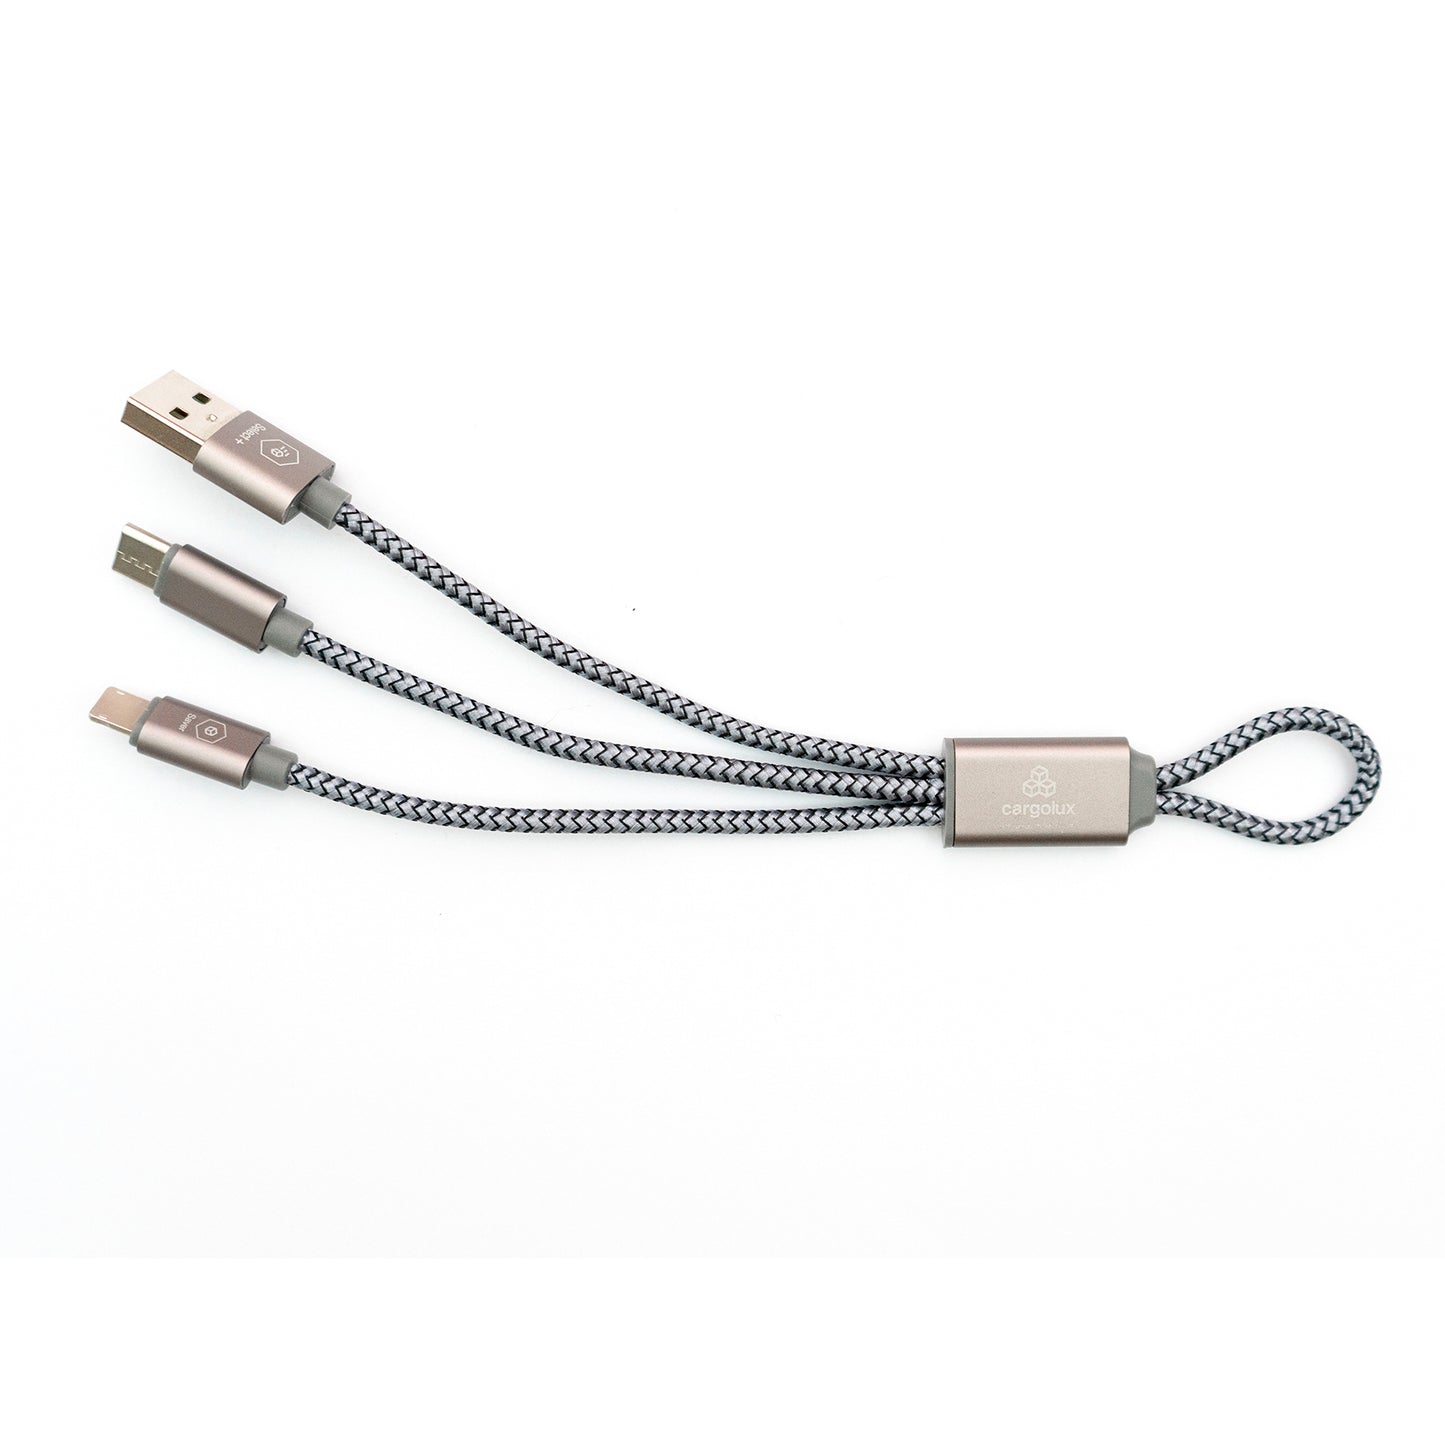 3 way charging cable - Ceres